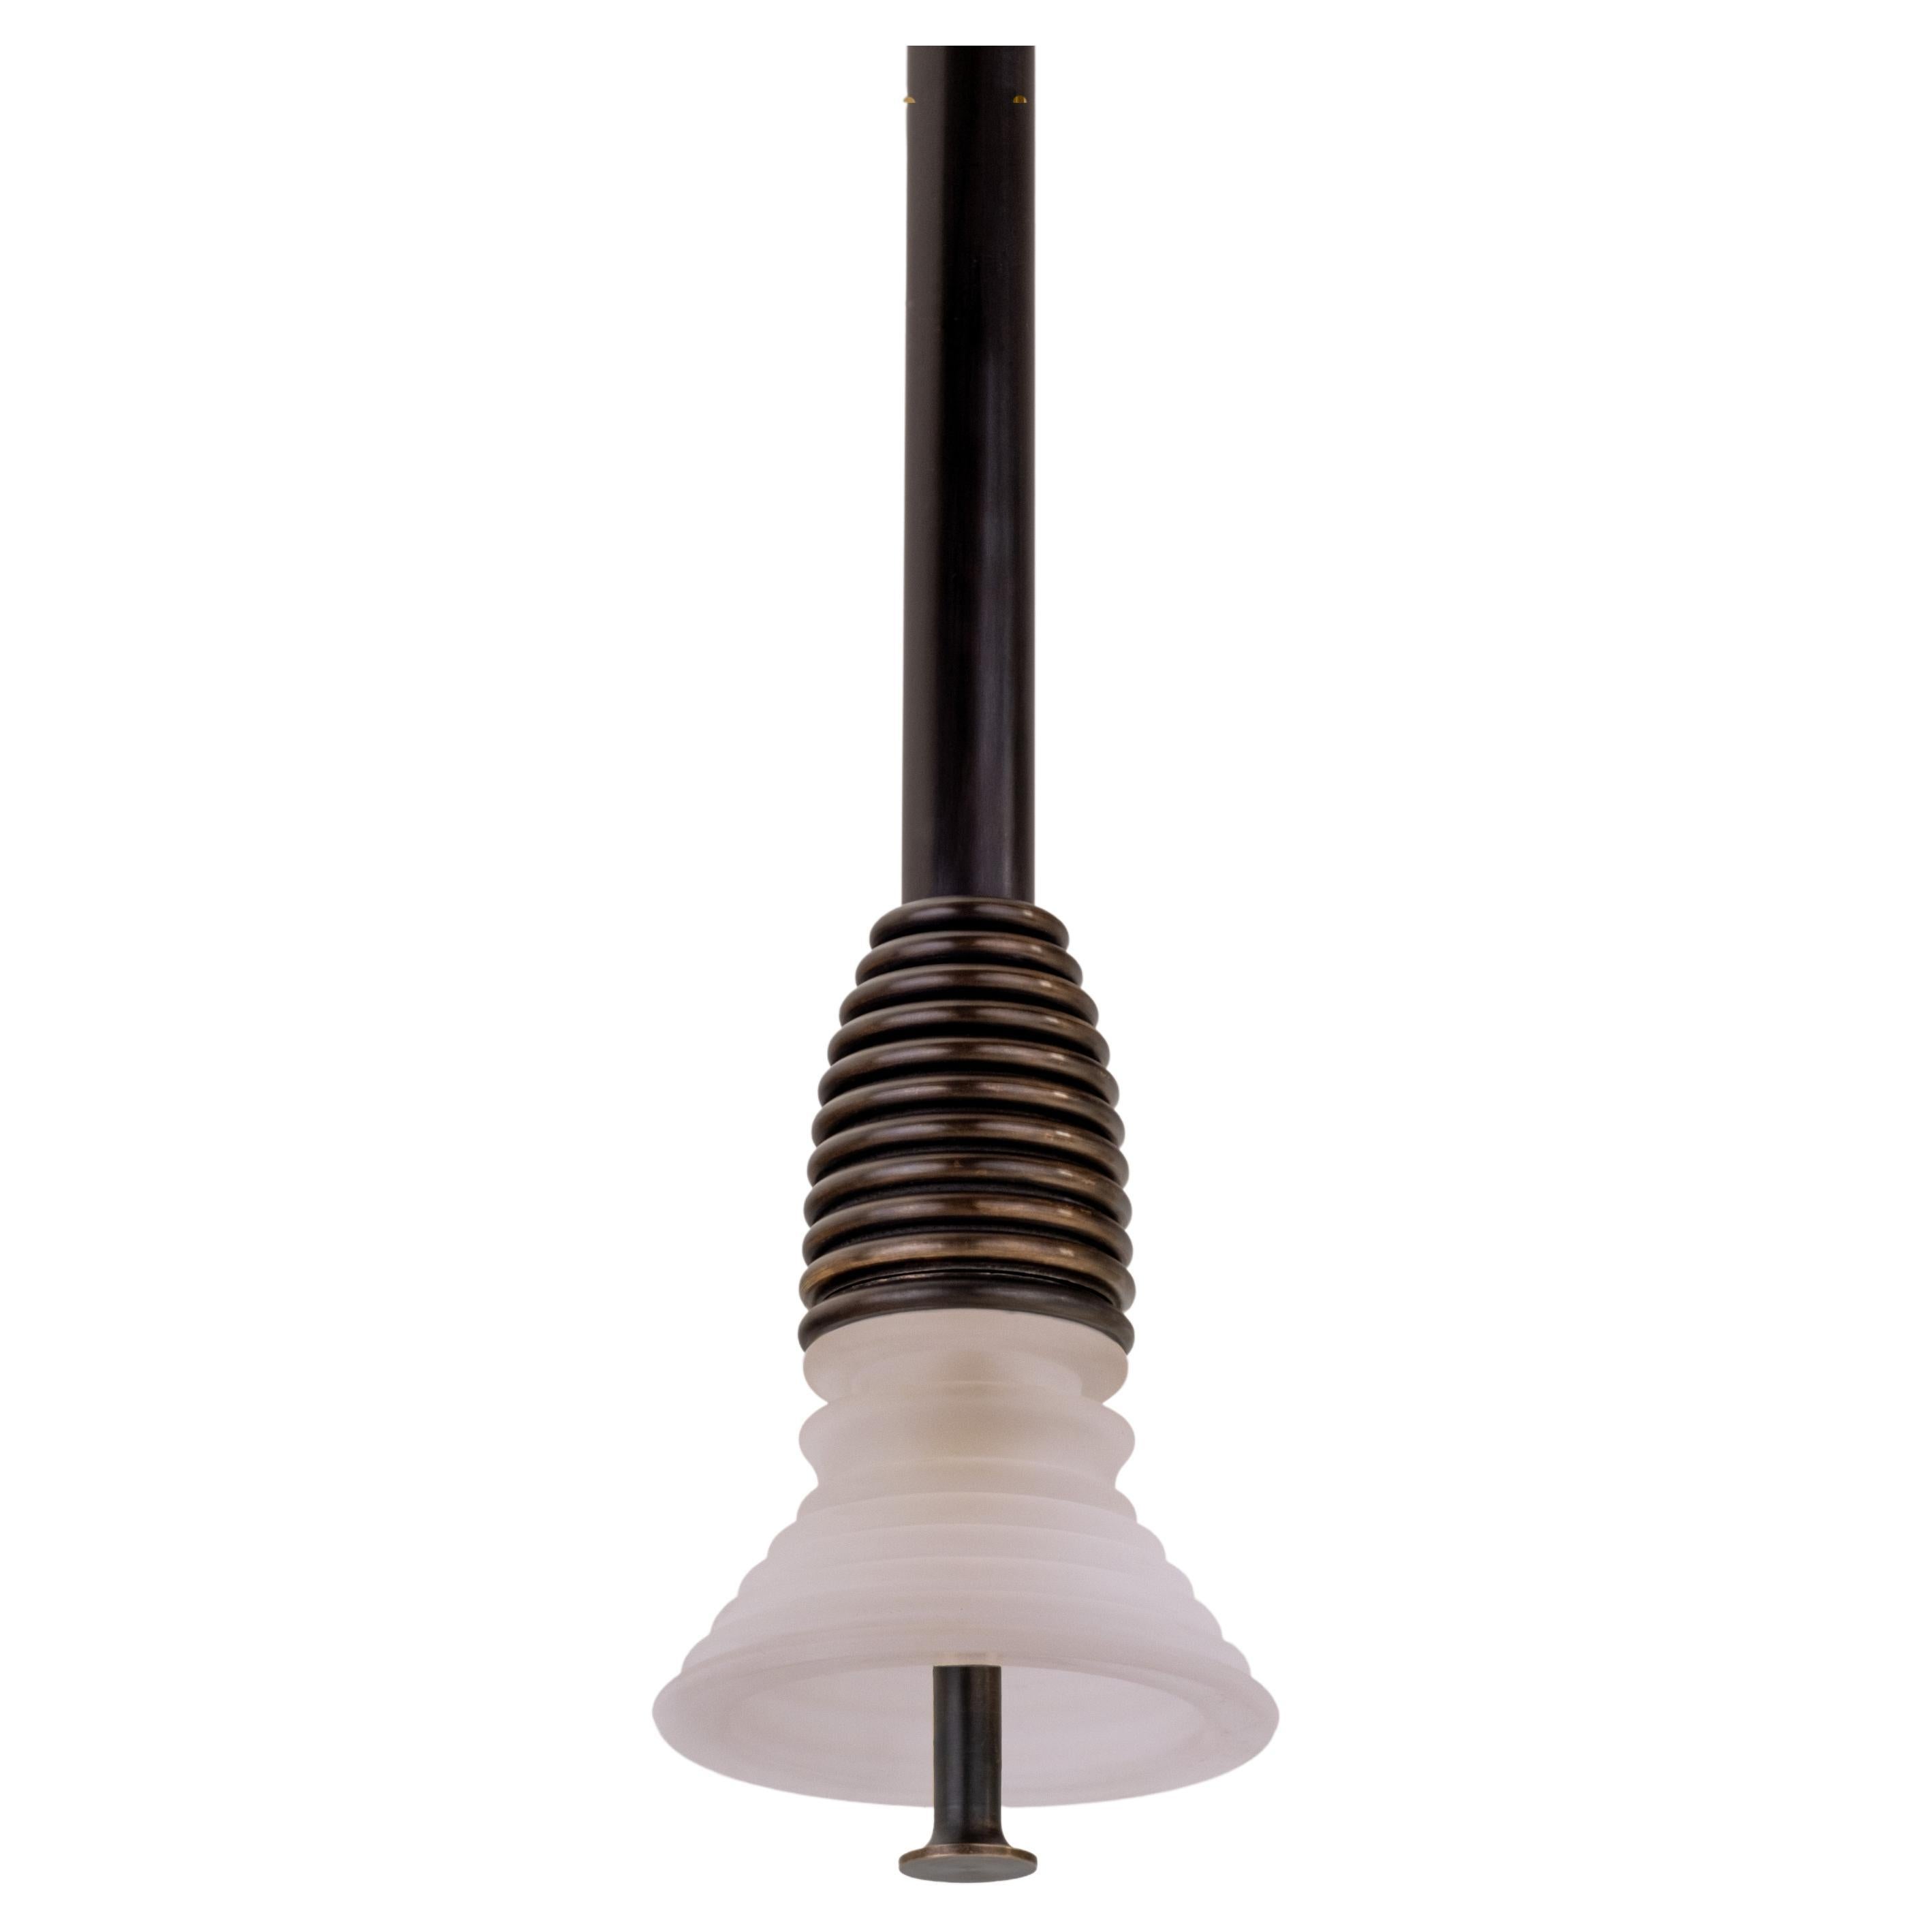 The Insulator 'A' Pendant in dark brass and frosted glass by NOVOCASTRIAN deco For Sale